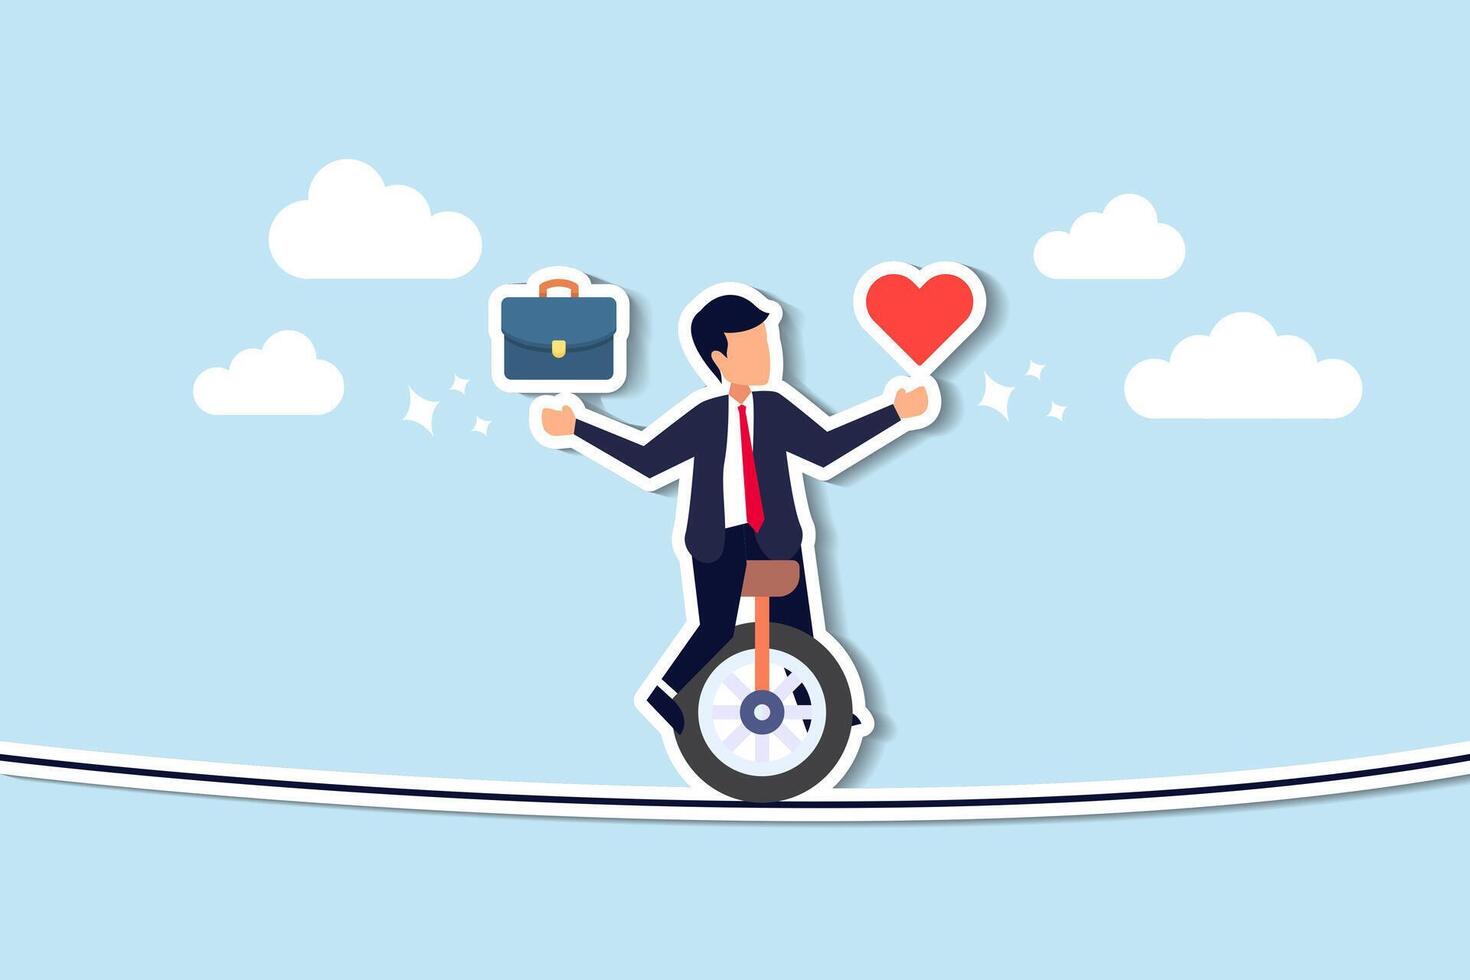 Balancing work and personal life involves managing stress, prioritizing family and health, and finding relaxation amidst responsibilities concept, businessman balance himself with heart and briefcase vector